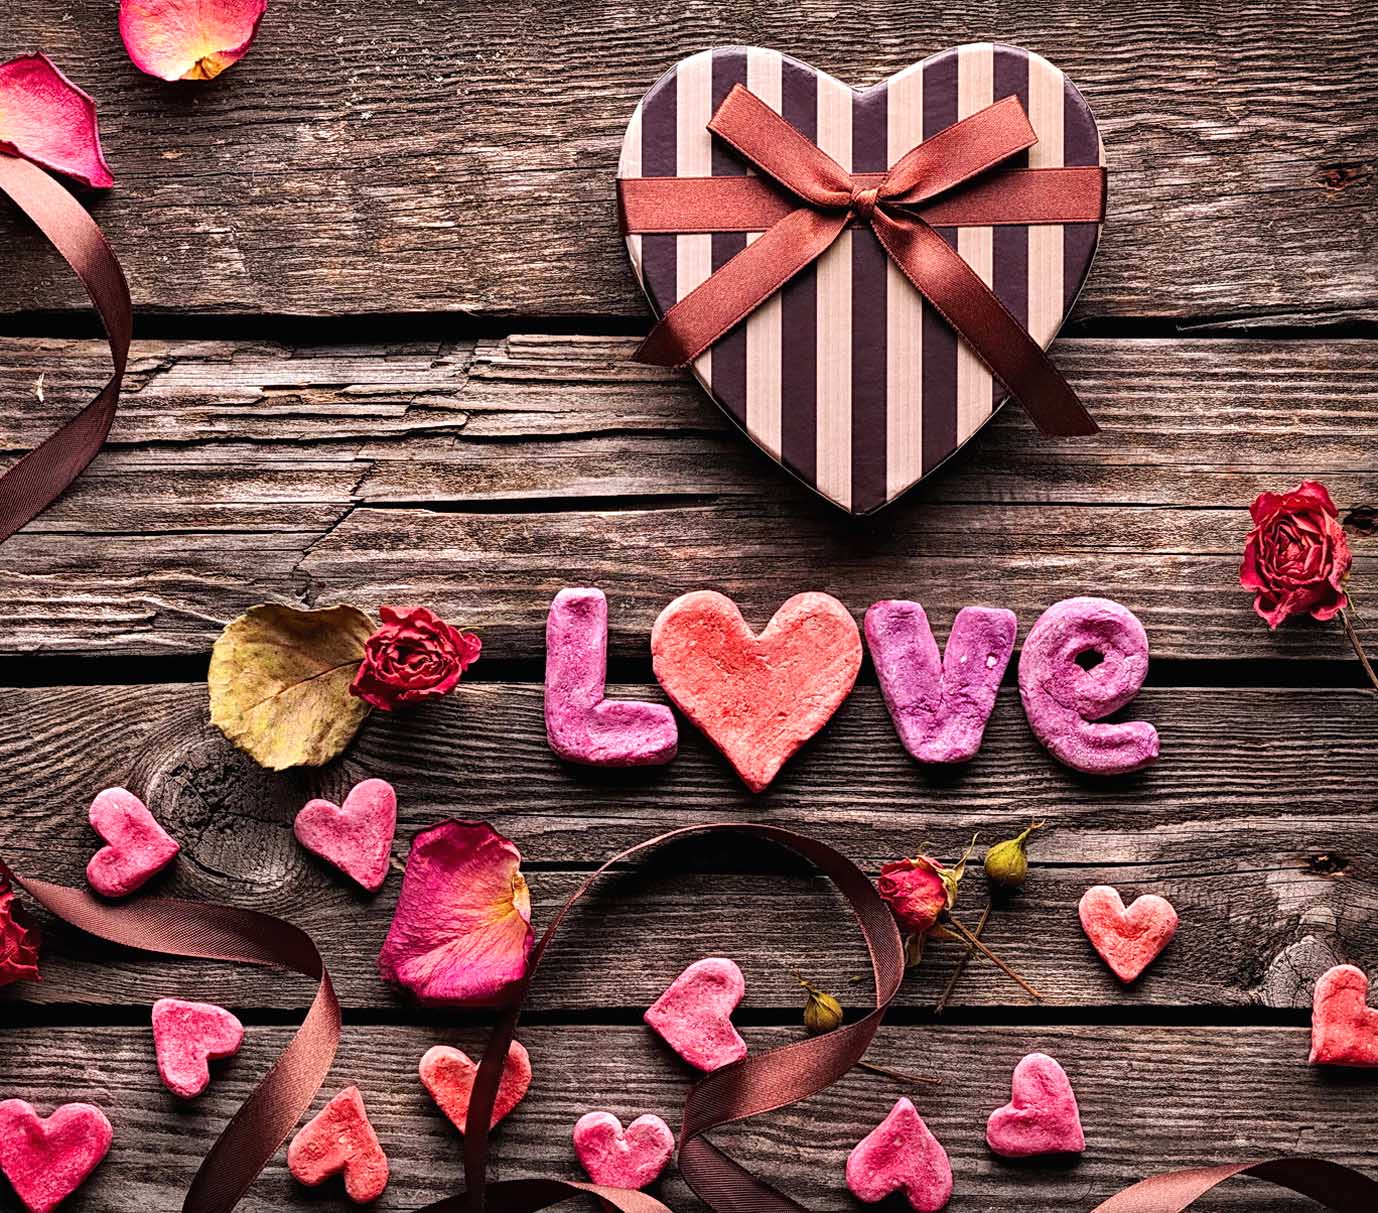 Mobile Love Wallpapers Free Download - Wallpapers HD Fine